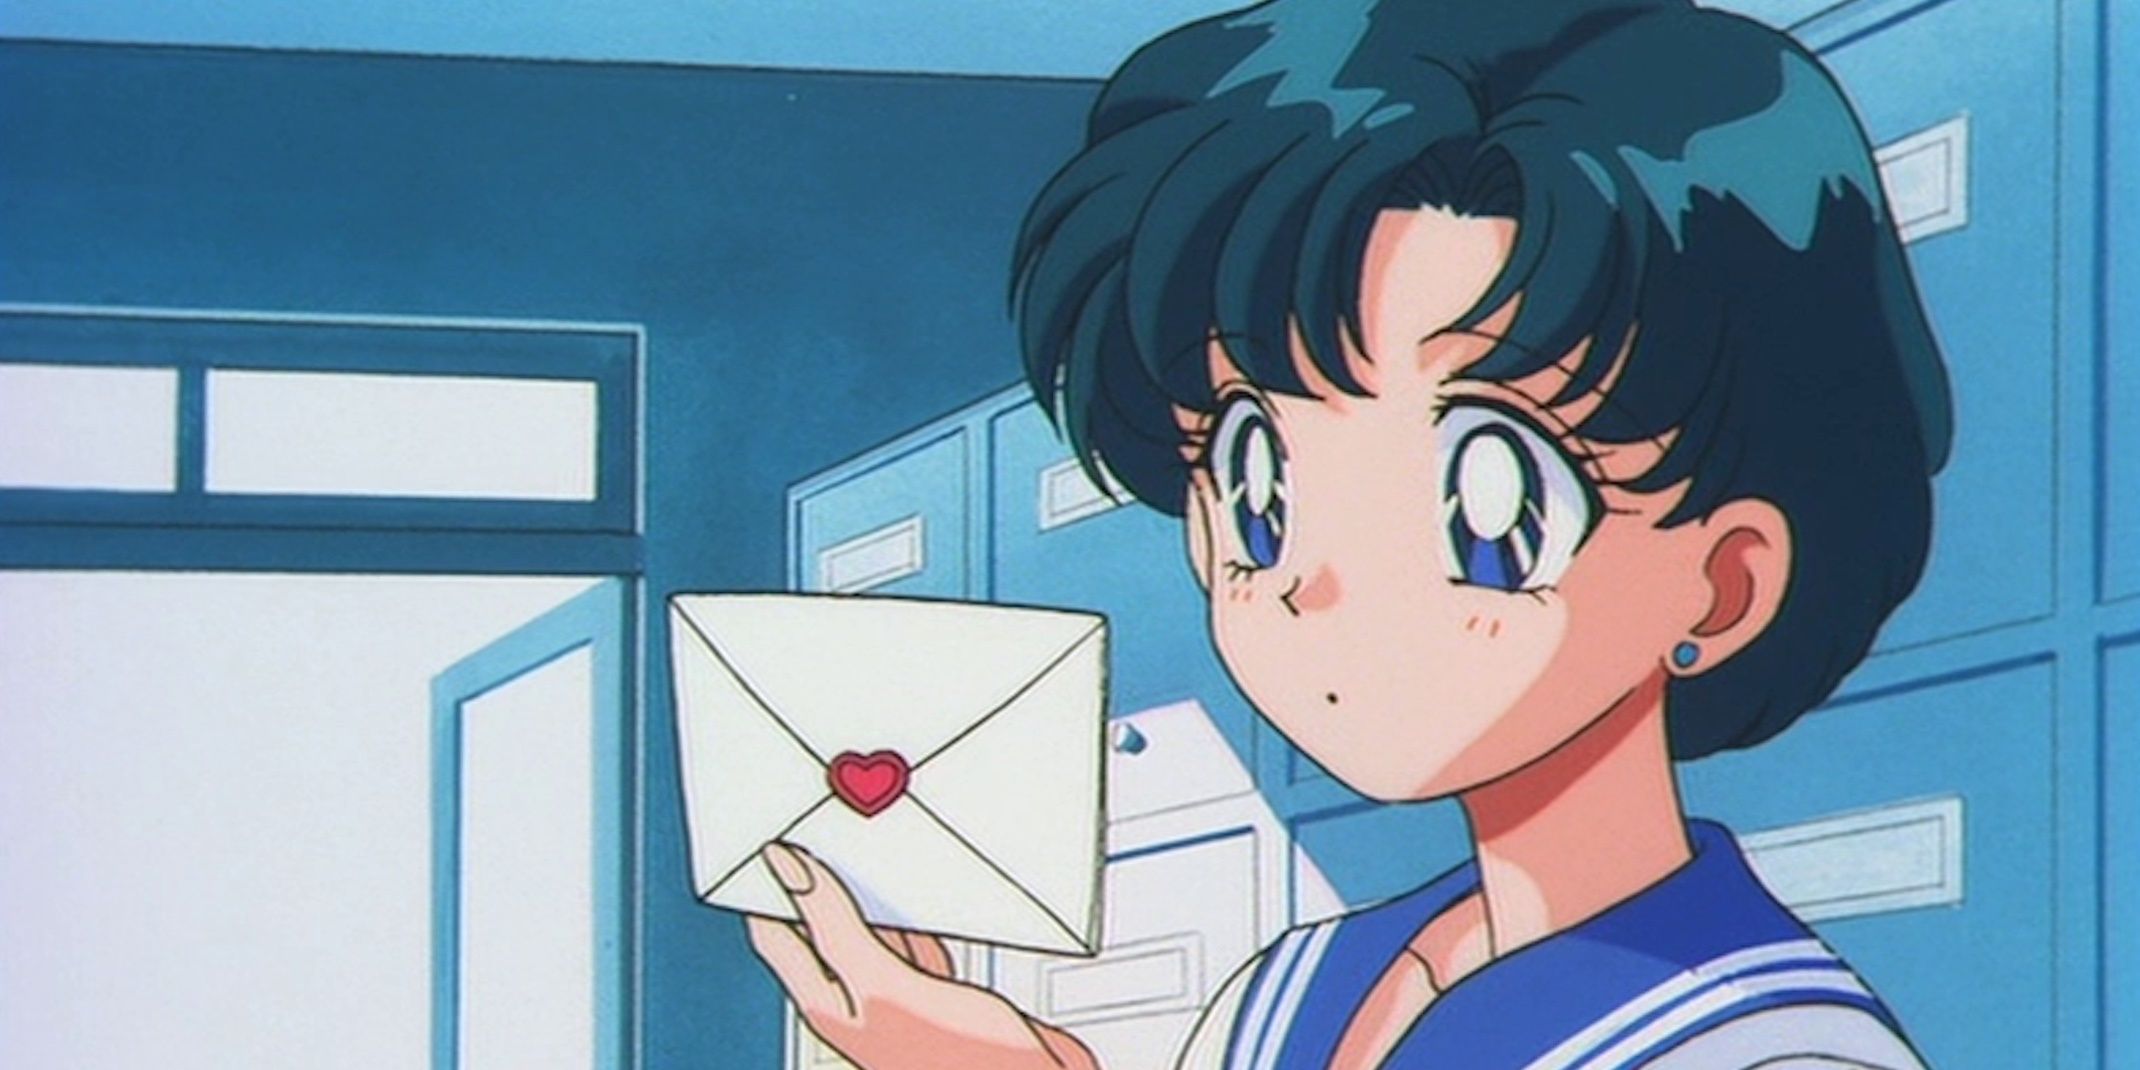 Ami holding love letter